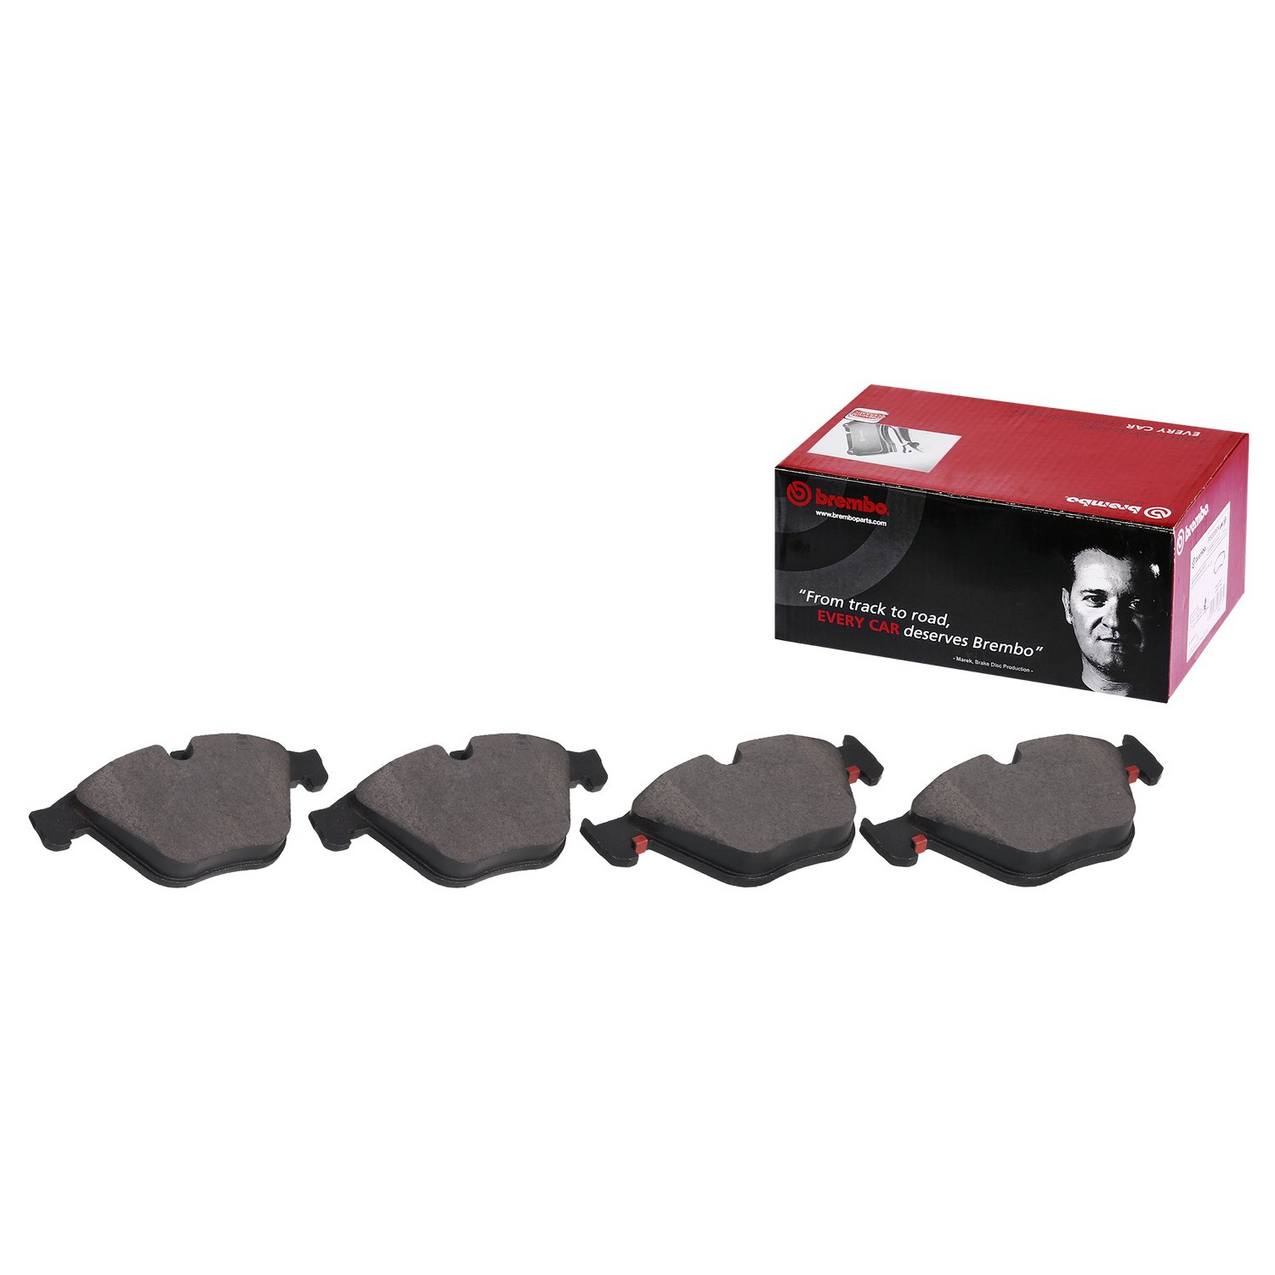 BMW Disc Brake Pad and Rotor Kit - Front (312mm) (Ceramic) (Xtra) Brembo